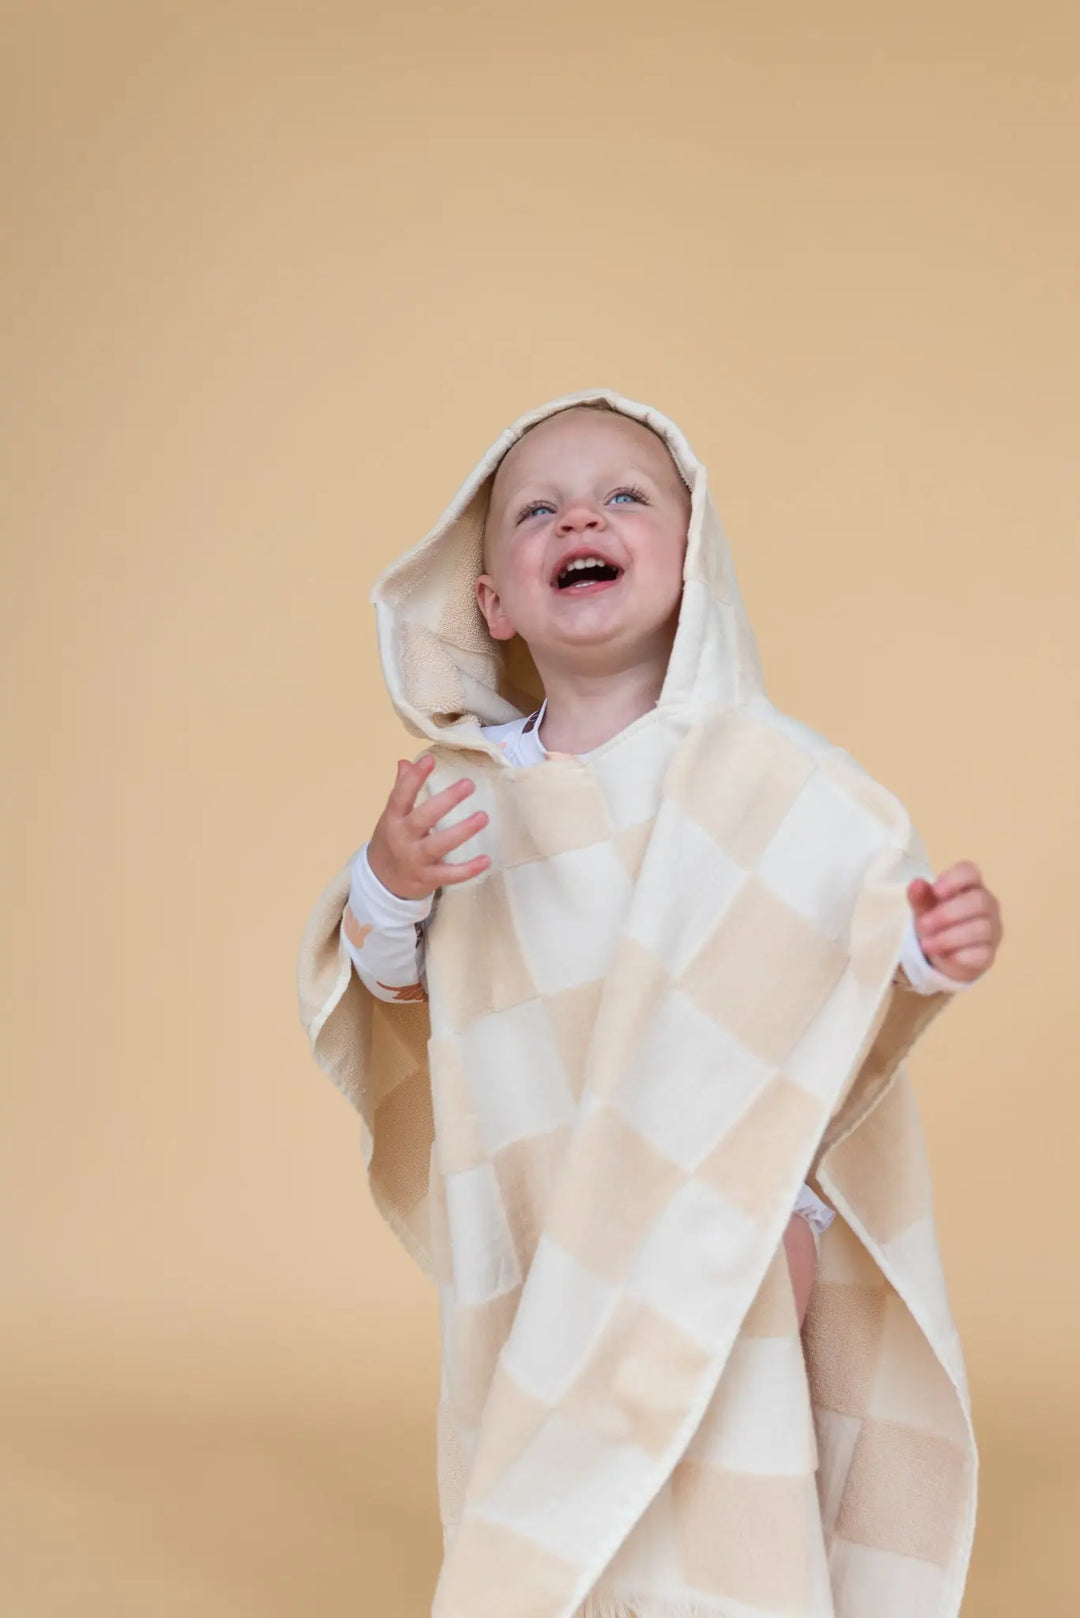 CHECKERBOARD HOODED PONCHO KIDS TOWEL